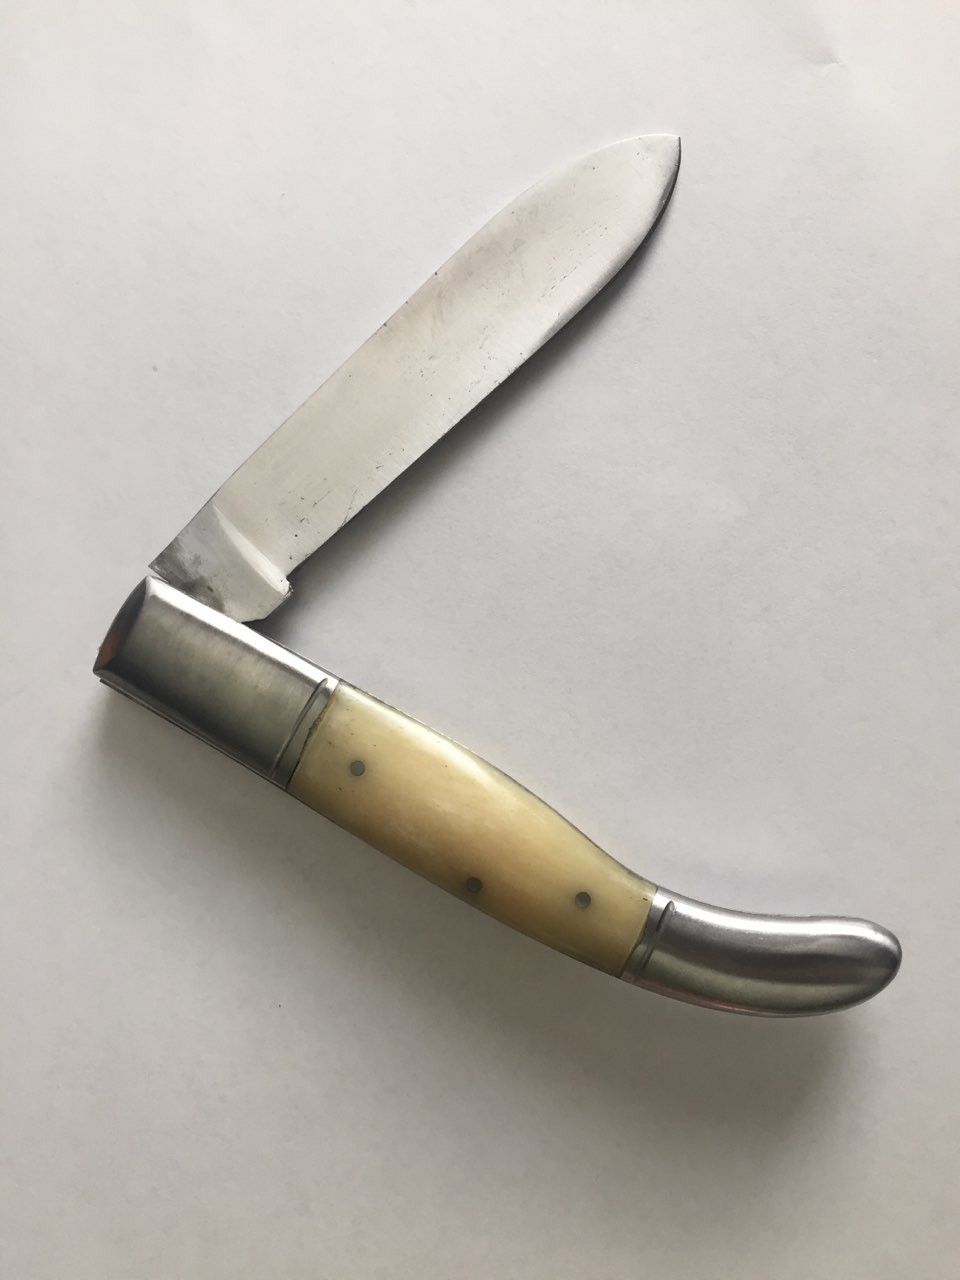 18th/Early 19th Century Pocket Knife - South Union Mills